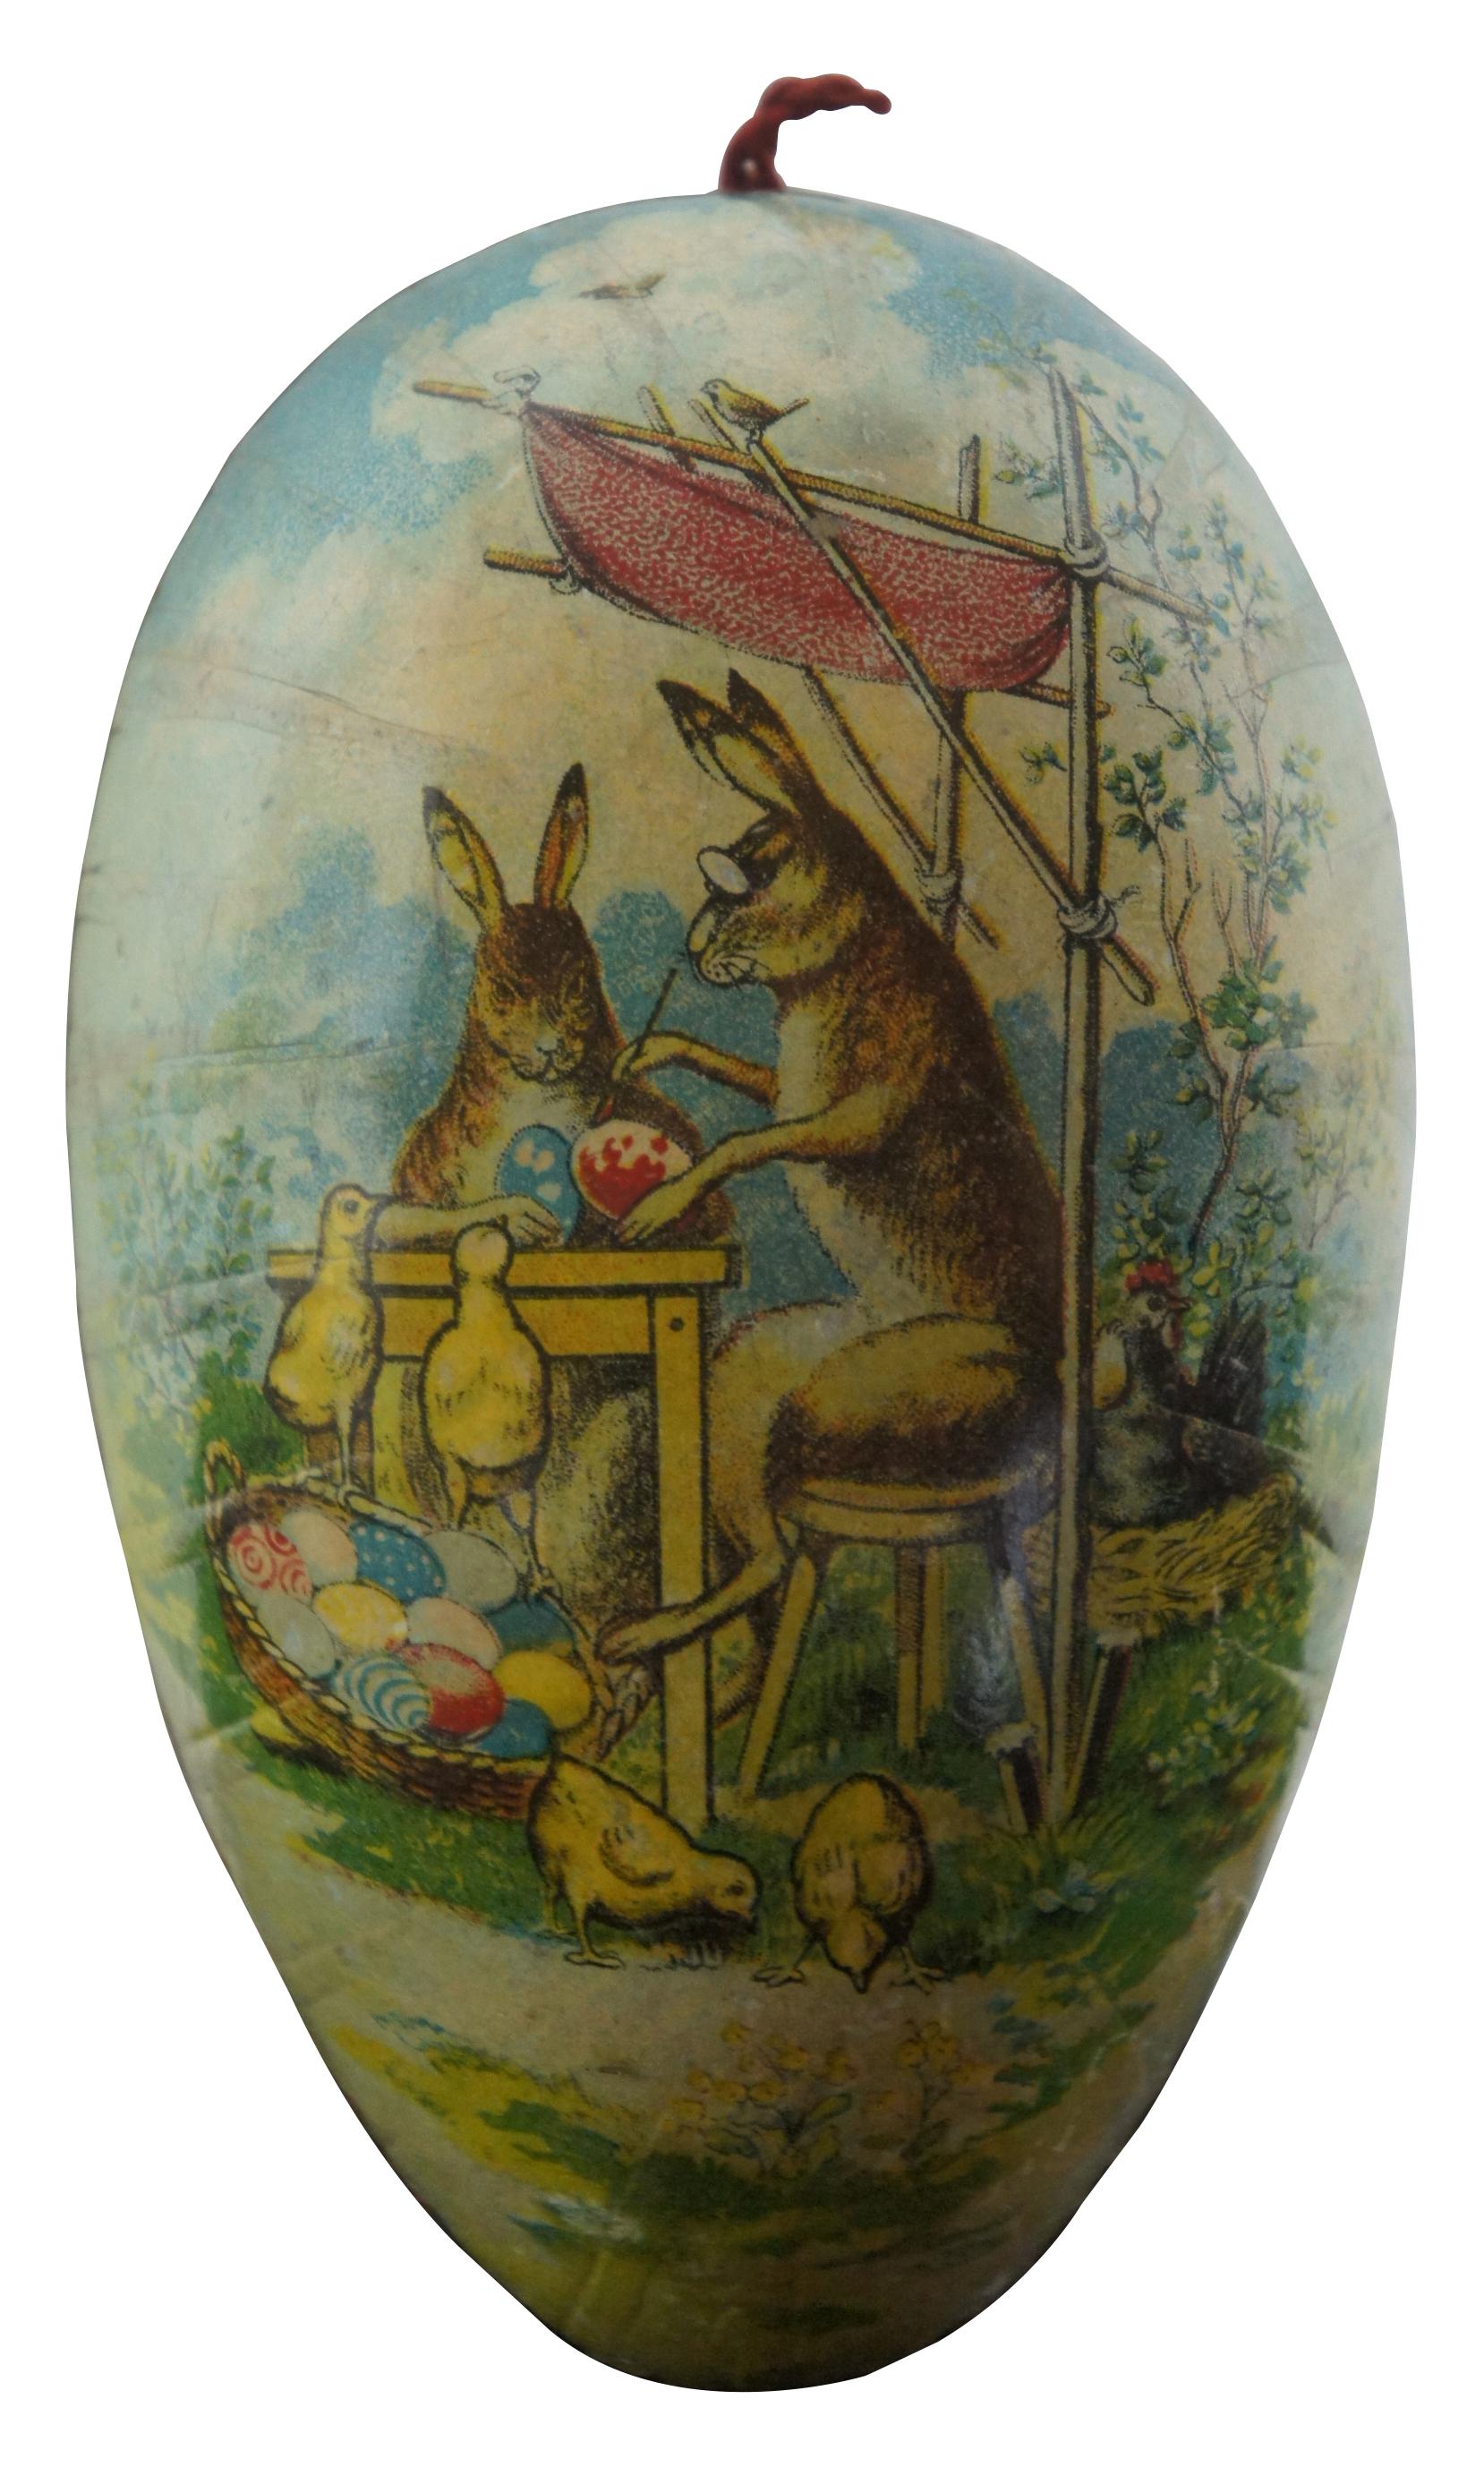 Antique German papier mâché Easter egg candy container, featuring lithograph scenes of a rooster and hen with chicks on one side and rabbits painting Easter eggs on the other. Measure: 5.5